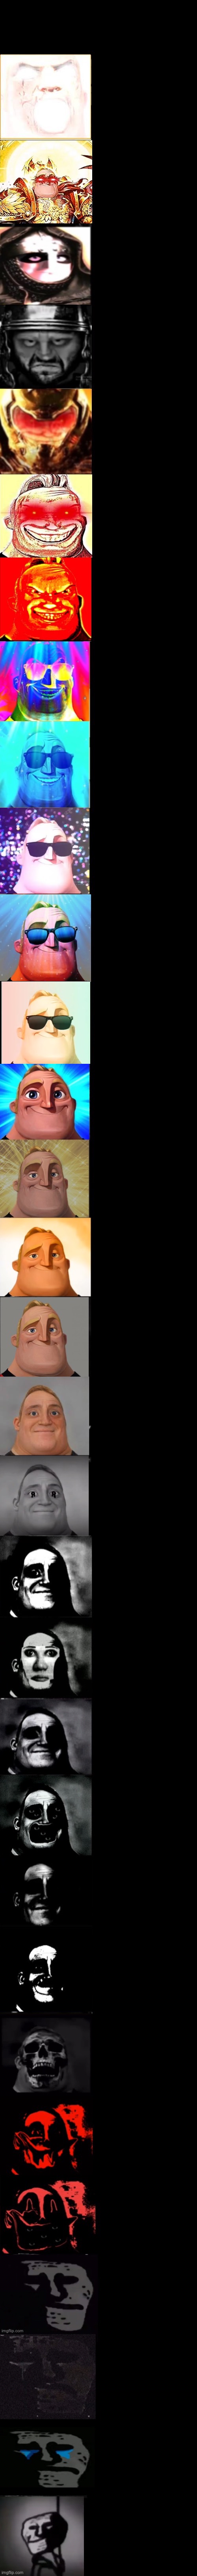 Mr Incredible Becoming Canny to Uncanny Super Extended Blank Meme Template